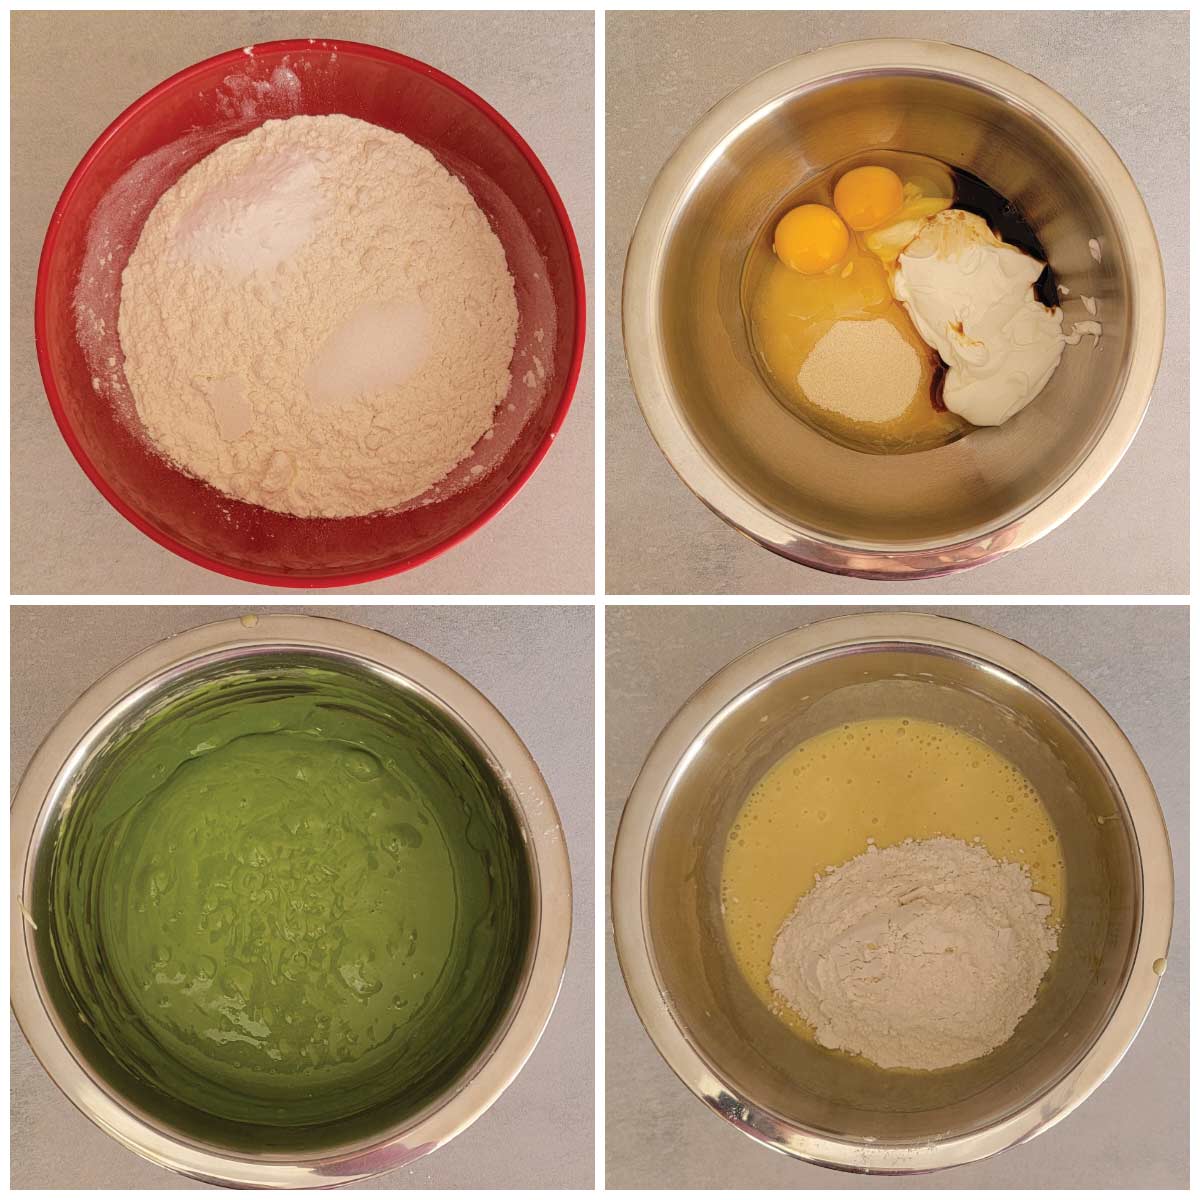 Steps for mixing and coloring the batter for the St. Patrick's Day cupcakes.